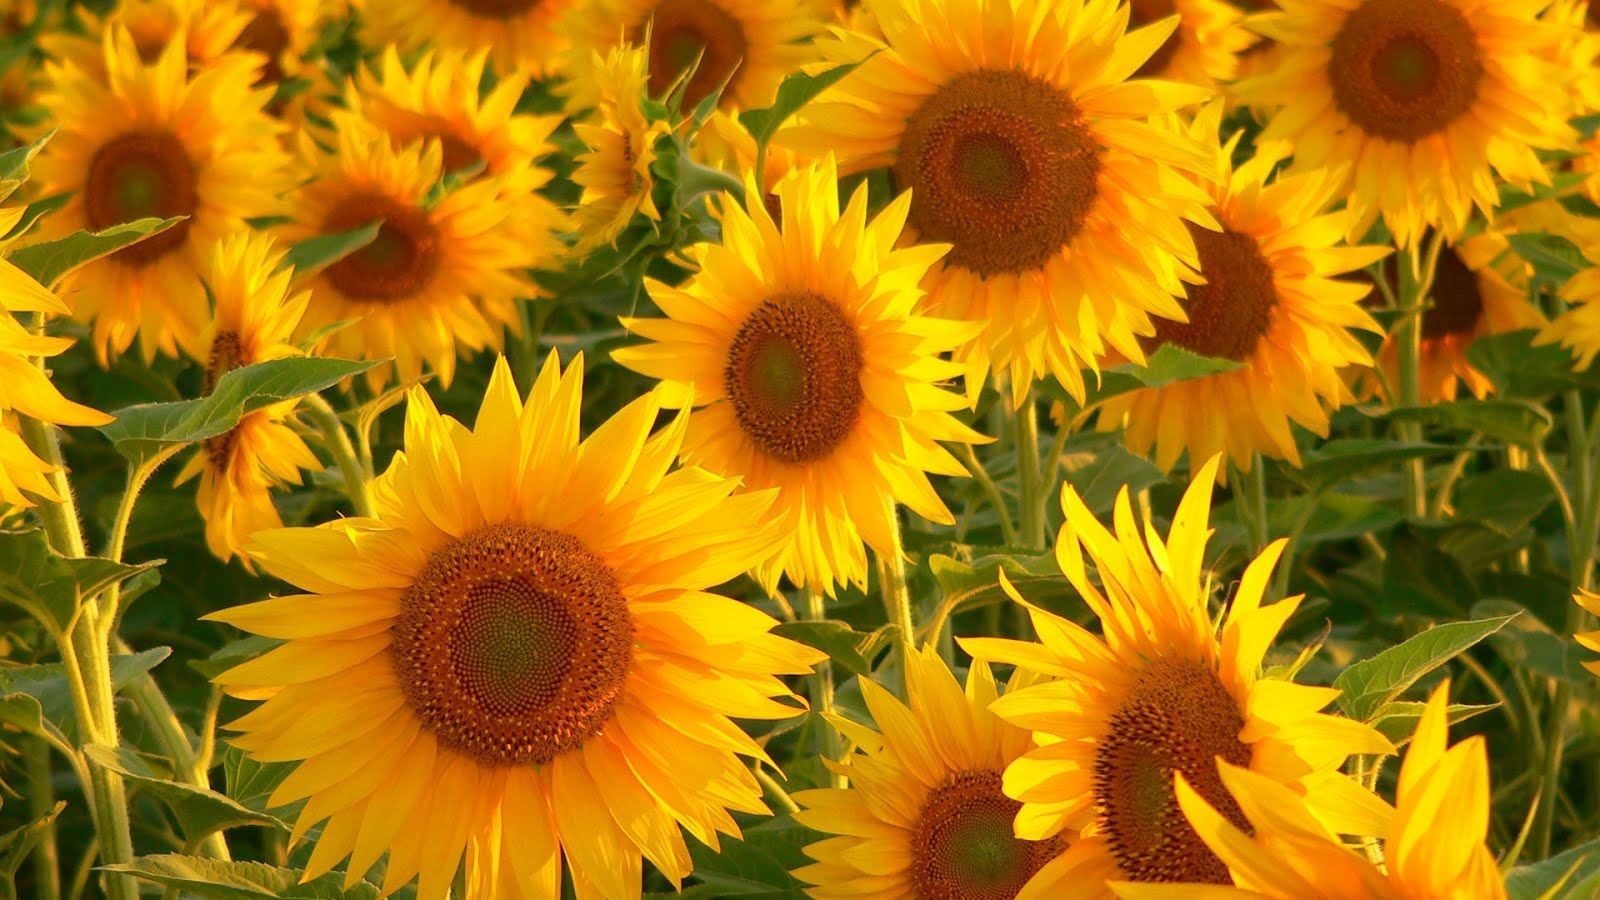 Free Wallpapers 1920x1080 HDTV: Sunflowers